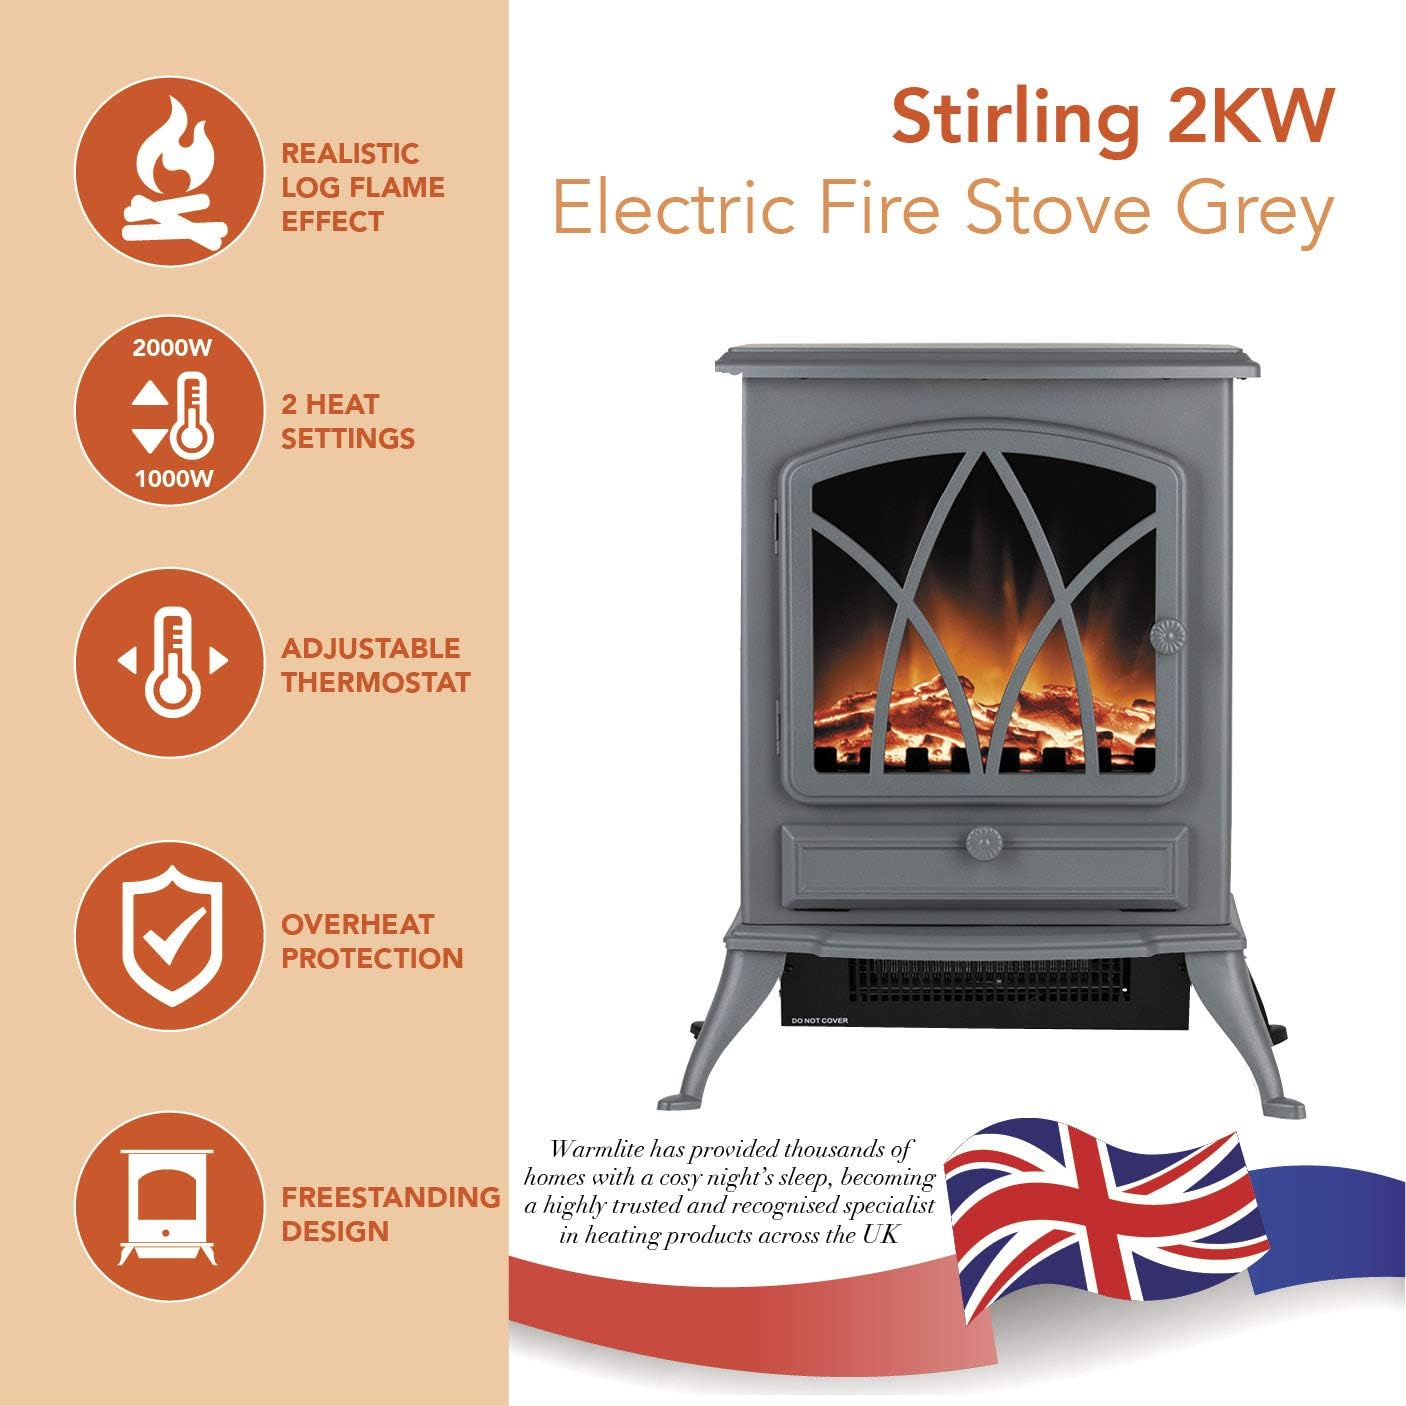 Warmlite WL46018C Stirling Portable Electric Fire Stove Heater with Realistic LED Flame Effect Adjustable Thermostat Overheat Protection 2000W cream